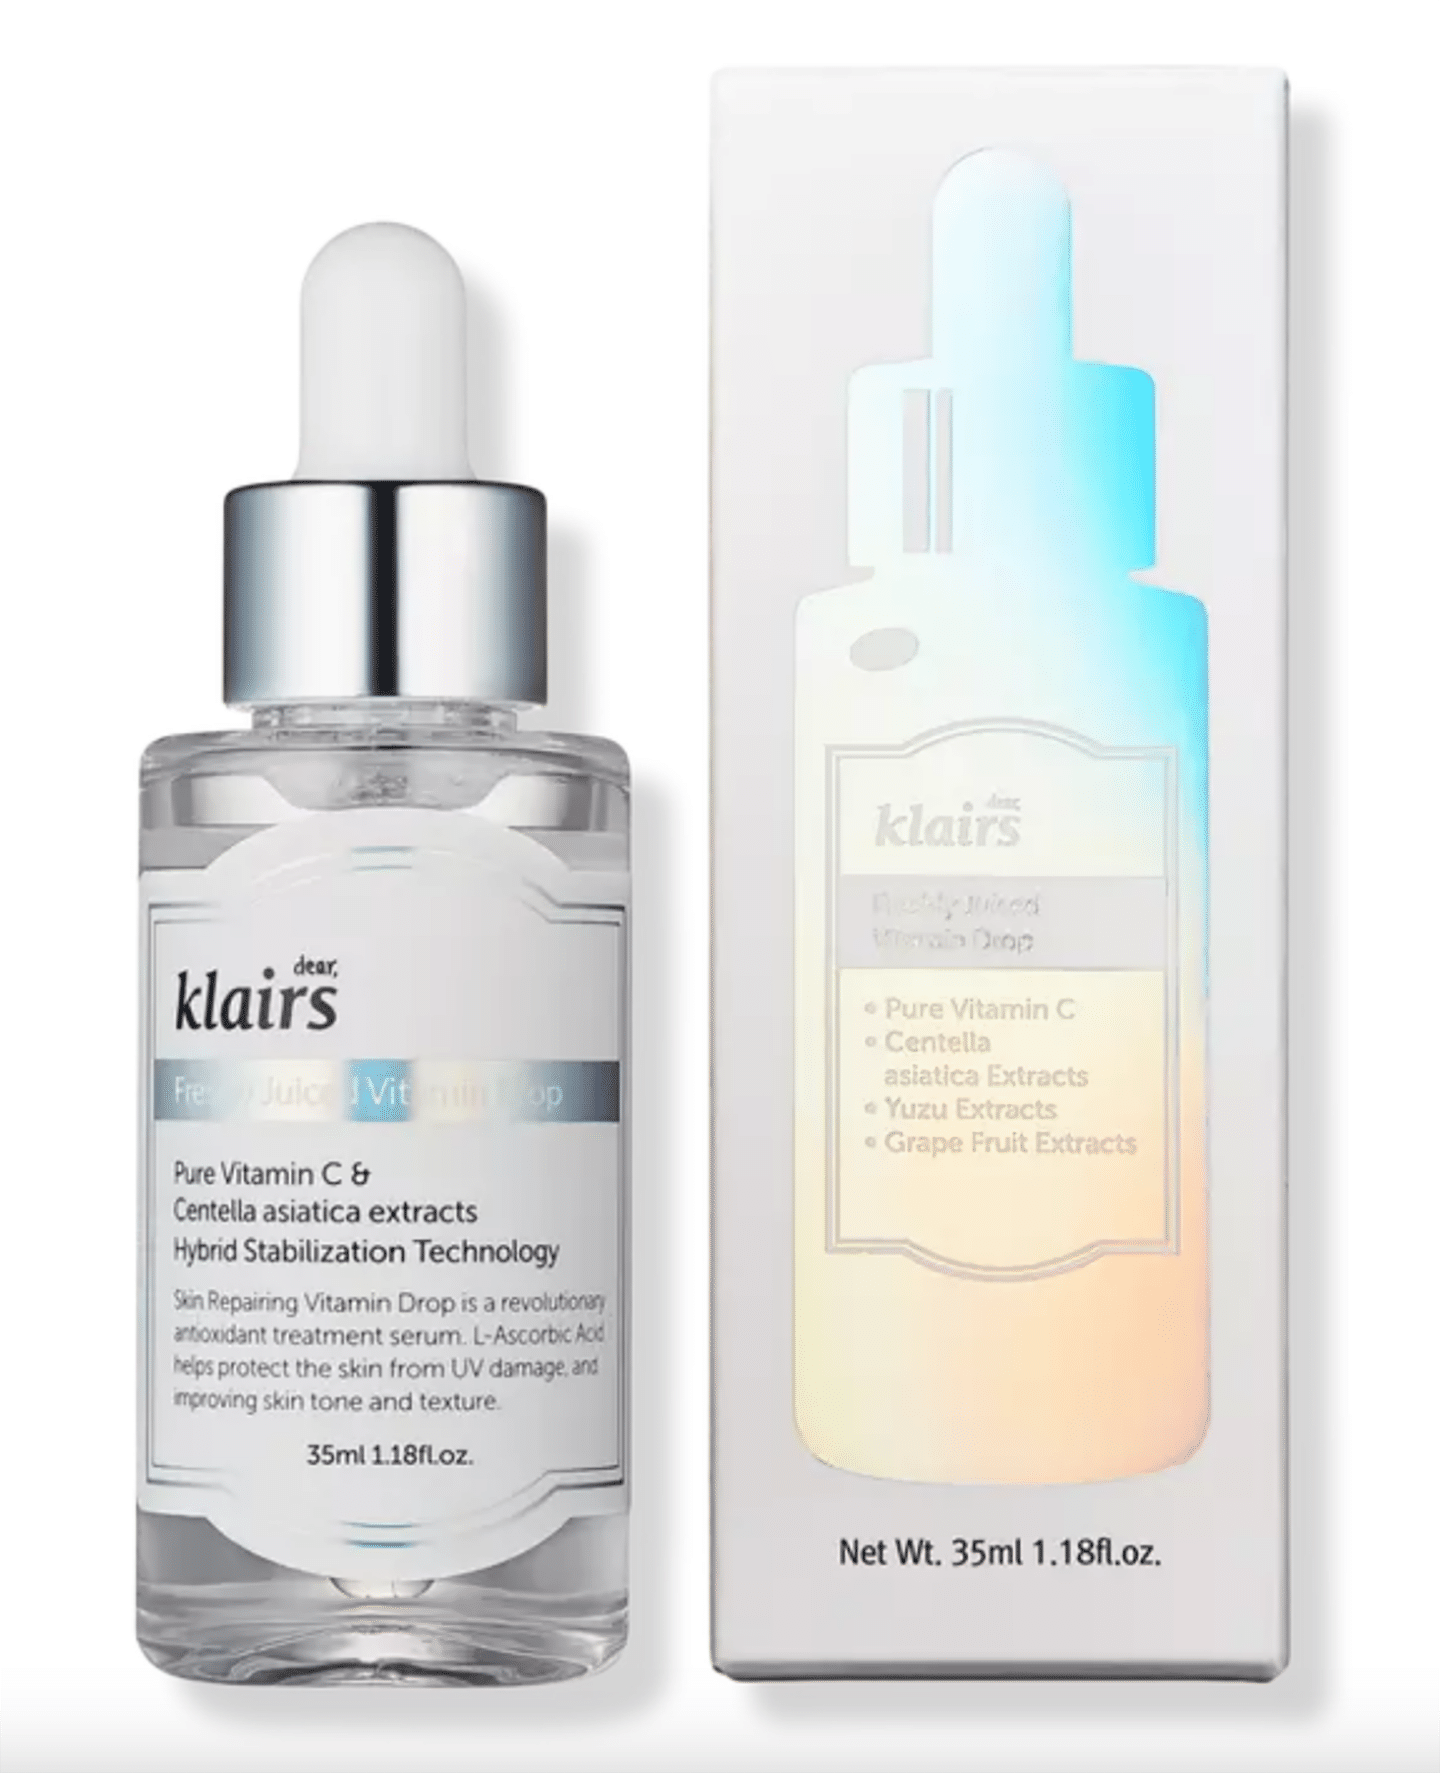 The top 7 Korean Vitamin C serums for all skin types, by blogger What The Fab